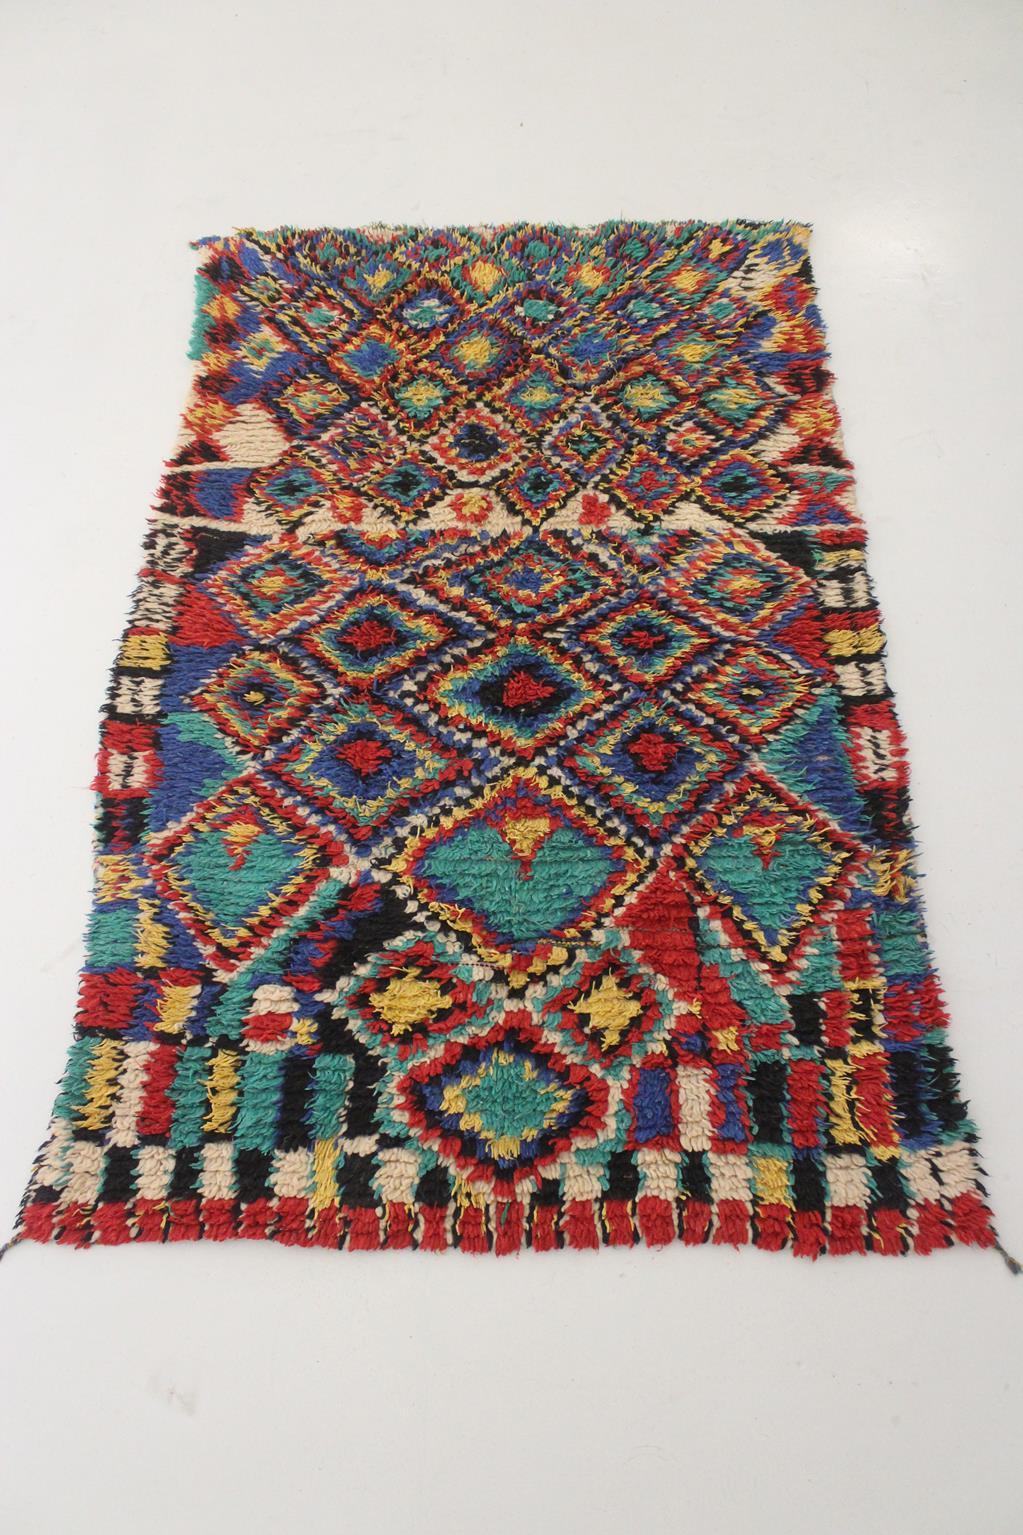 Vintage Moroccan Azilal rug - Blue/red/green - 4.1x6.5feet / 125x200cm In Good Condition For Sale In Marrakech, MA